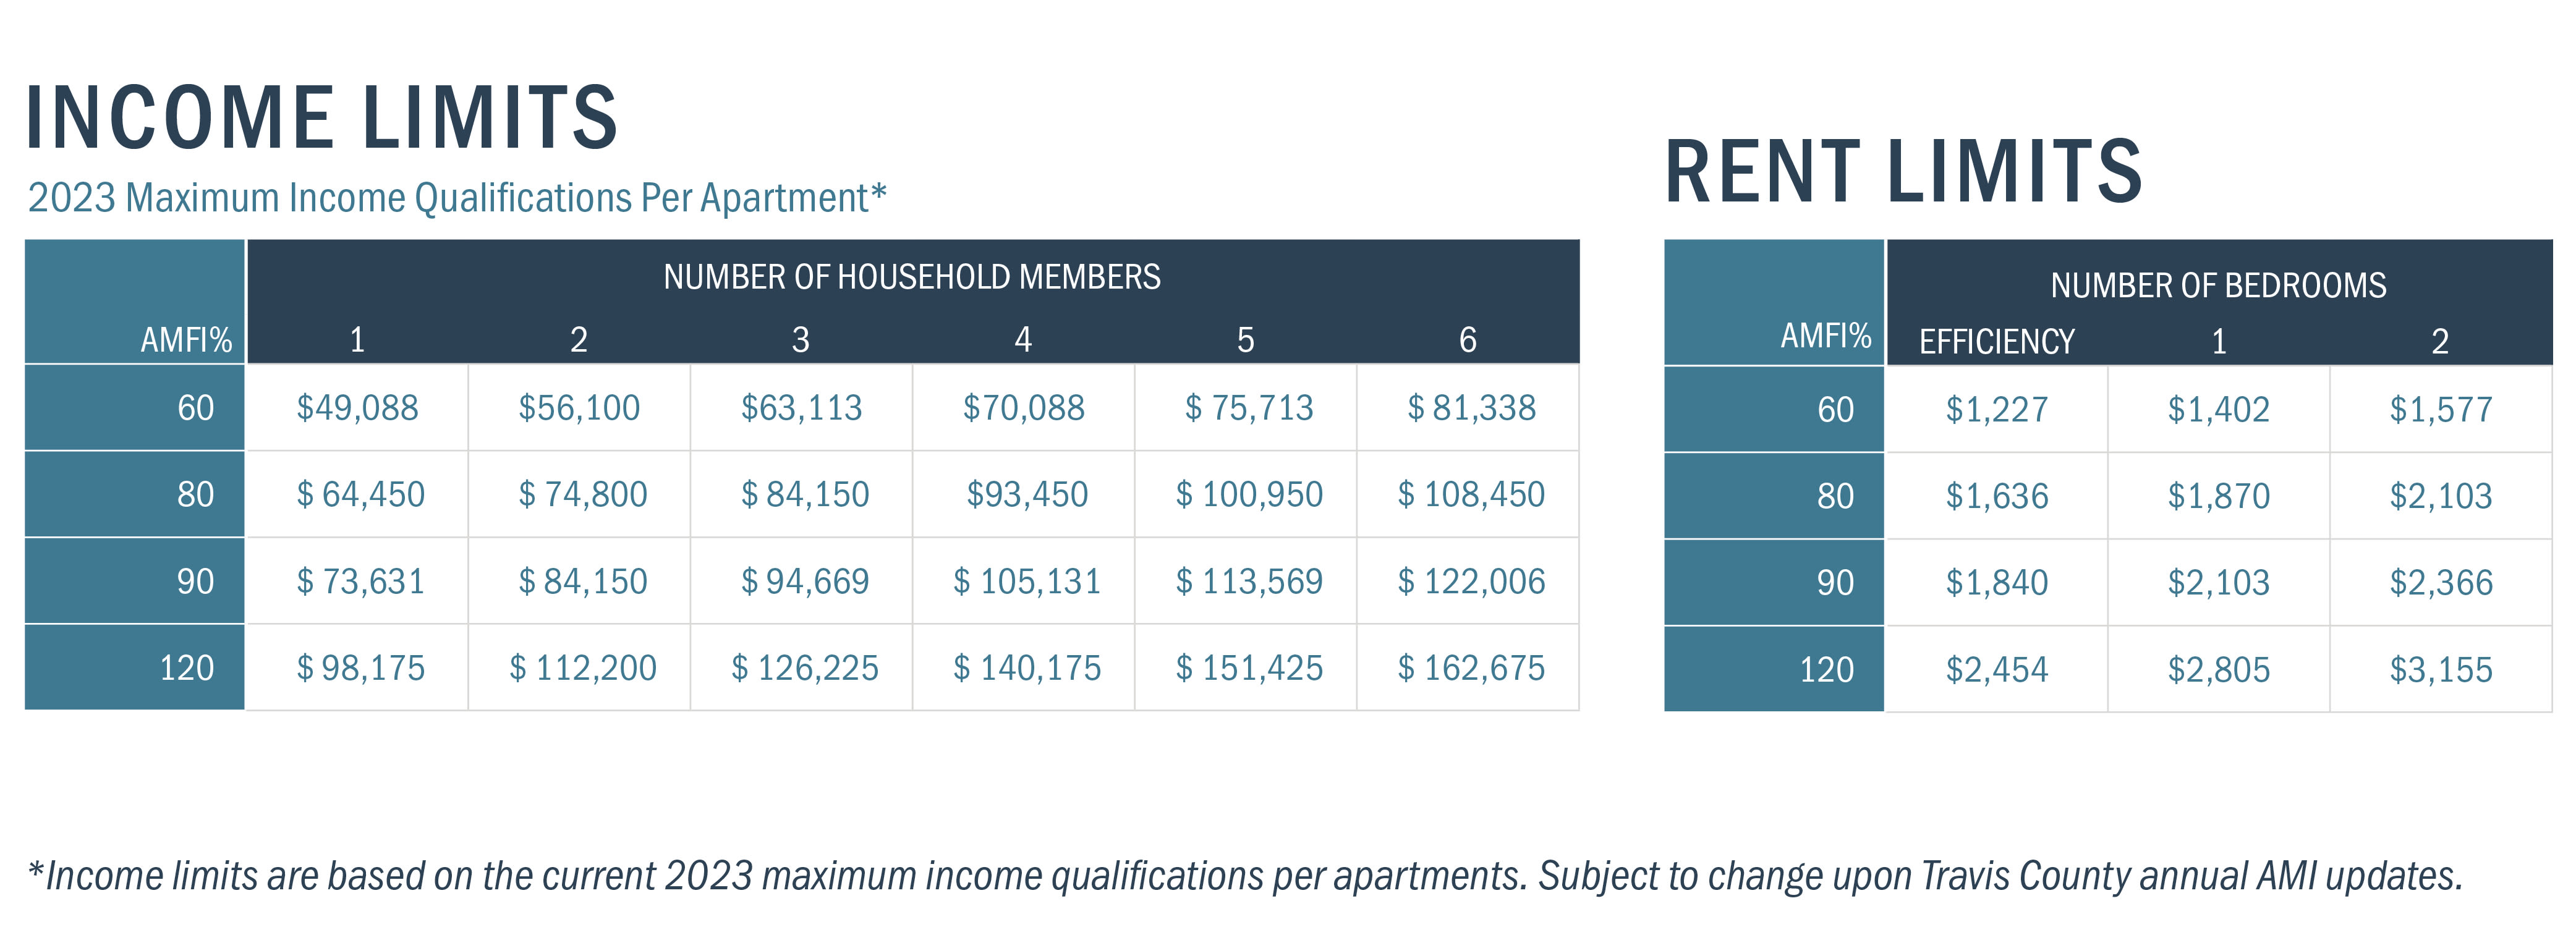 Income and Rent limits at 44 South in Austin, Texas